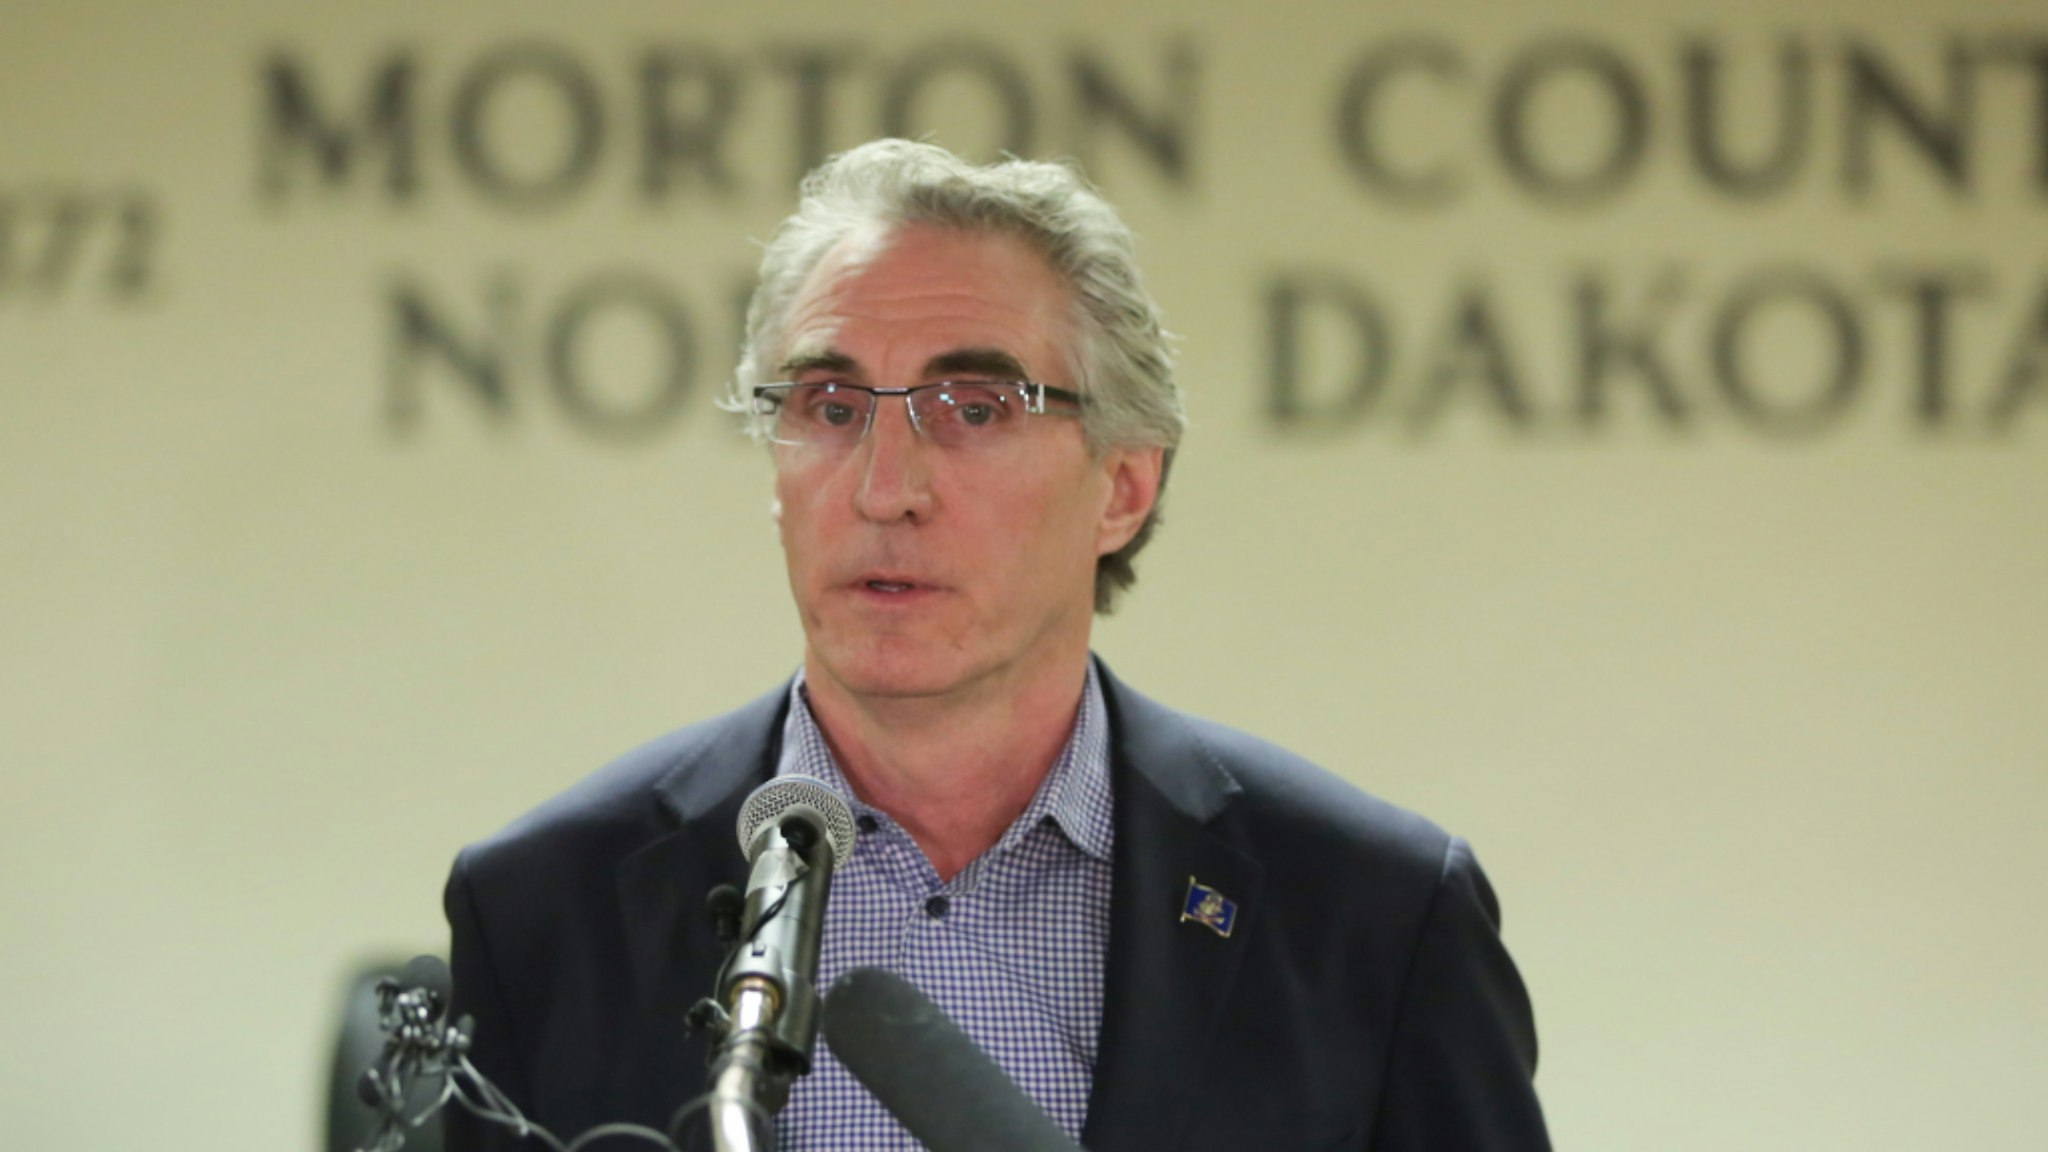 North Dakota Governor Doug Burgum speaks during a press conference announcing plans for the clean up of the Oceti Sakowin protest camp on February 22, 2017 in Mandan, North Dakota.